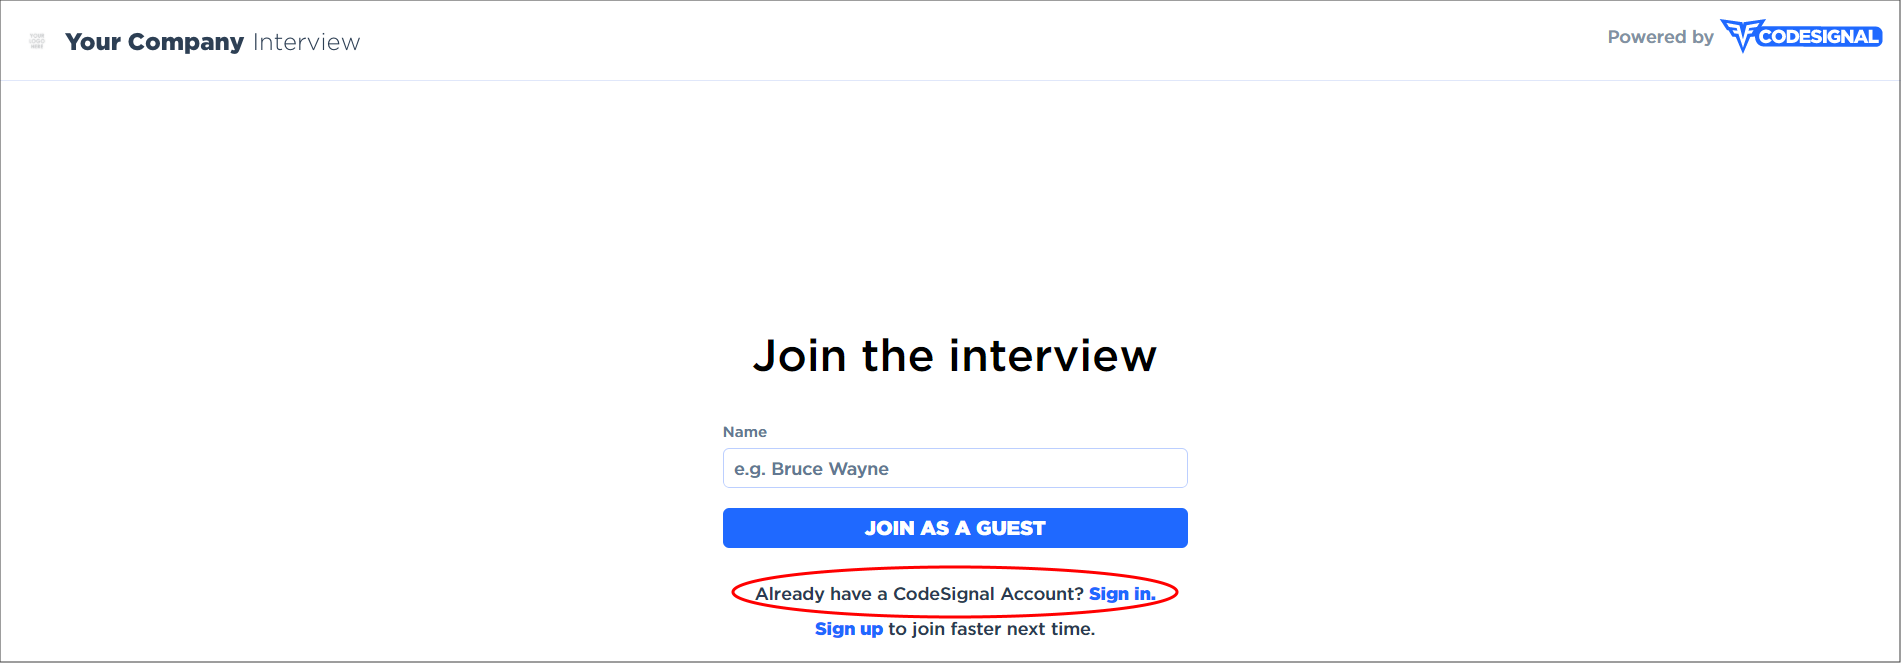 Interview_guest.PNG